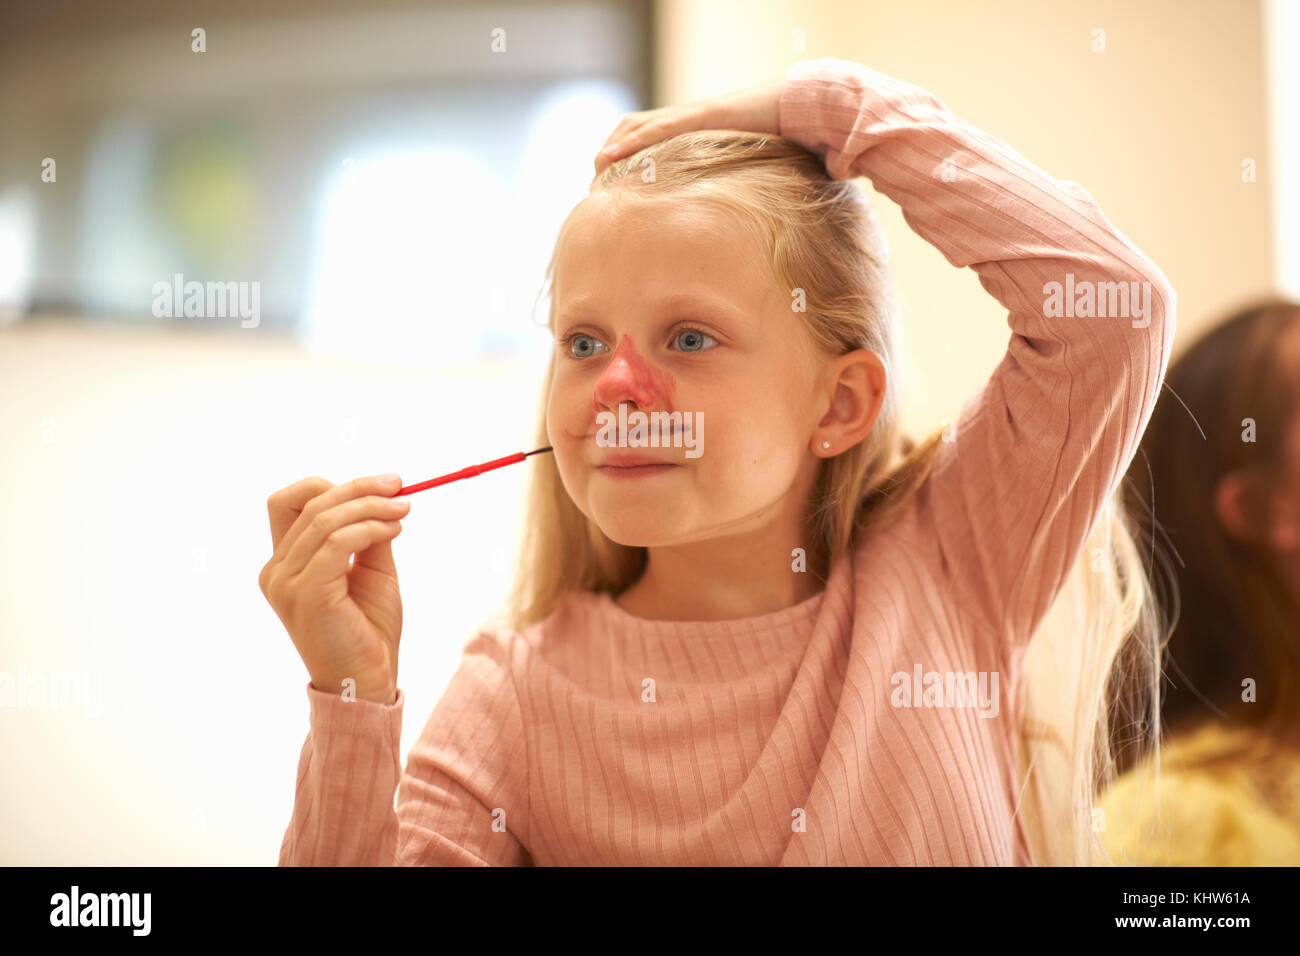 Young girl drawing on her face, using face paint Stock Photo